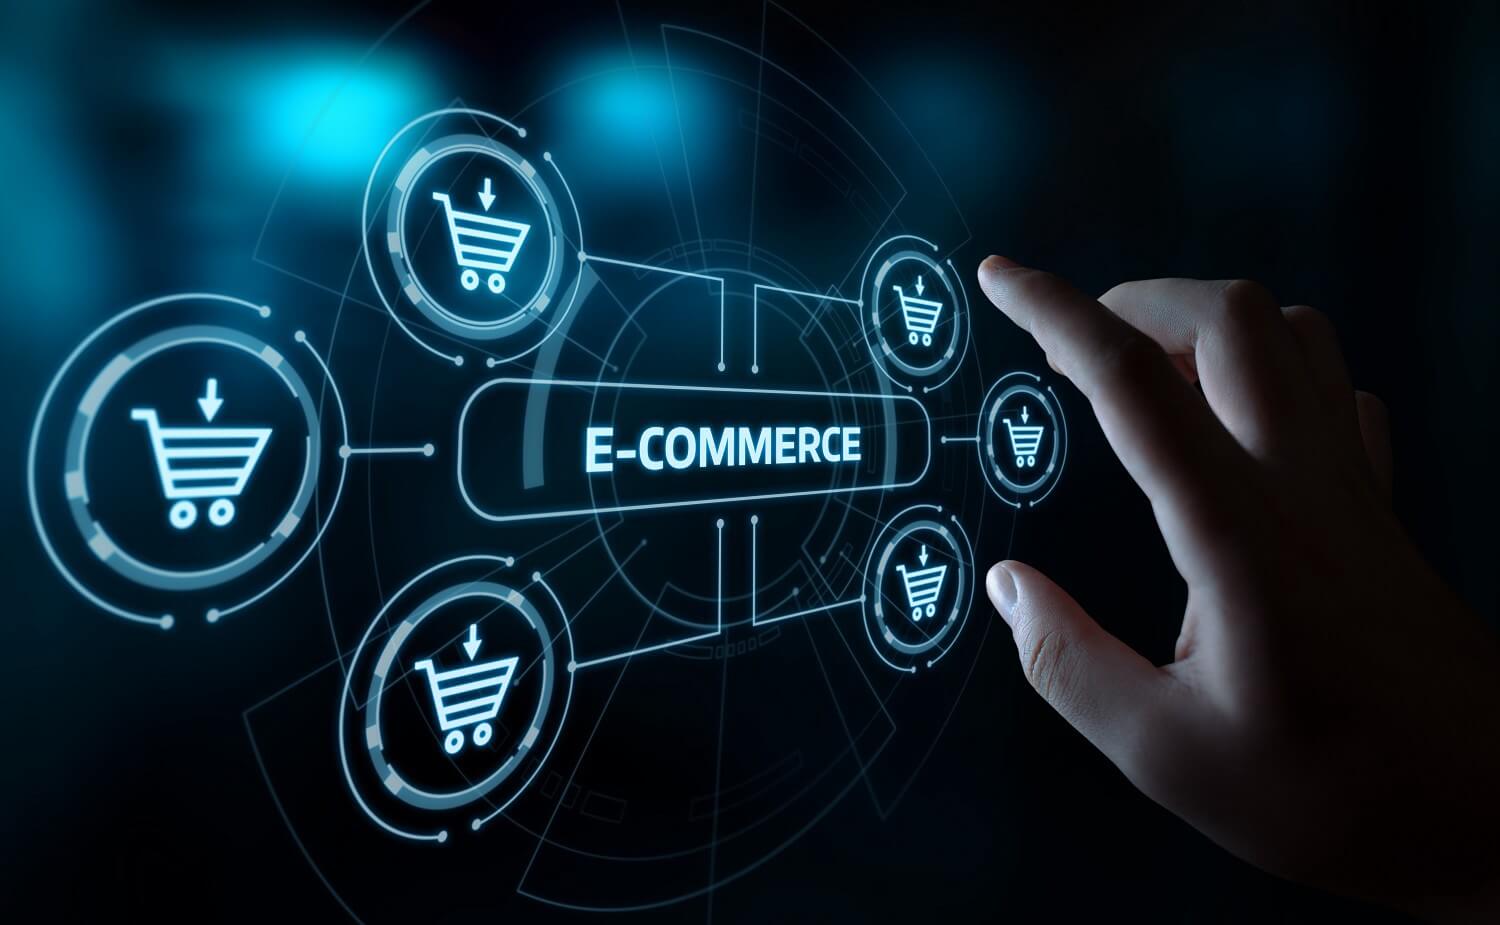 Growth of e-commerce platforms slows down